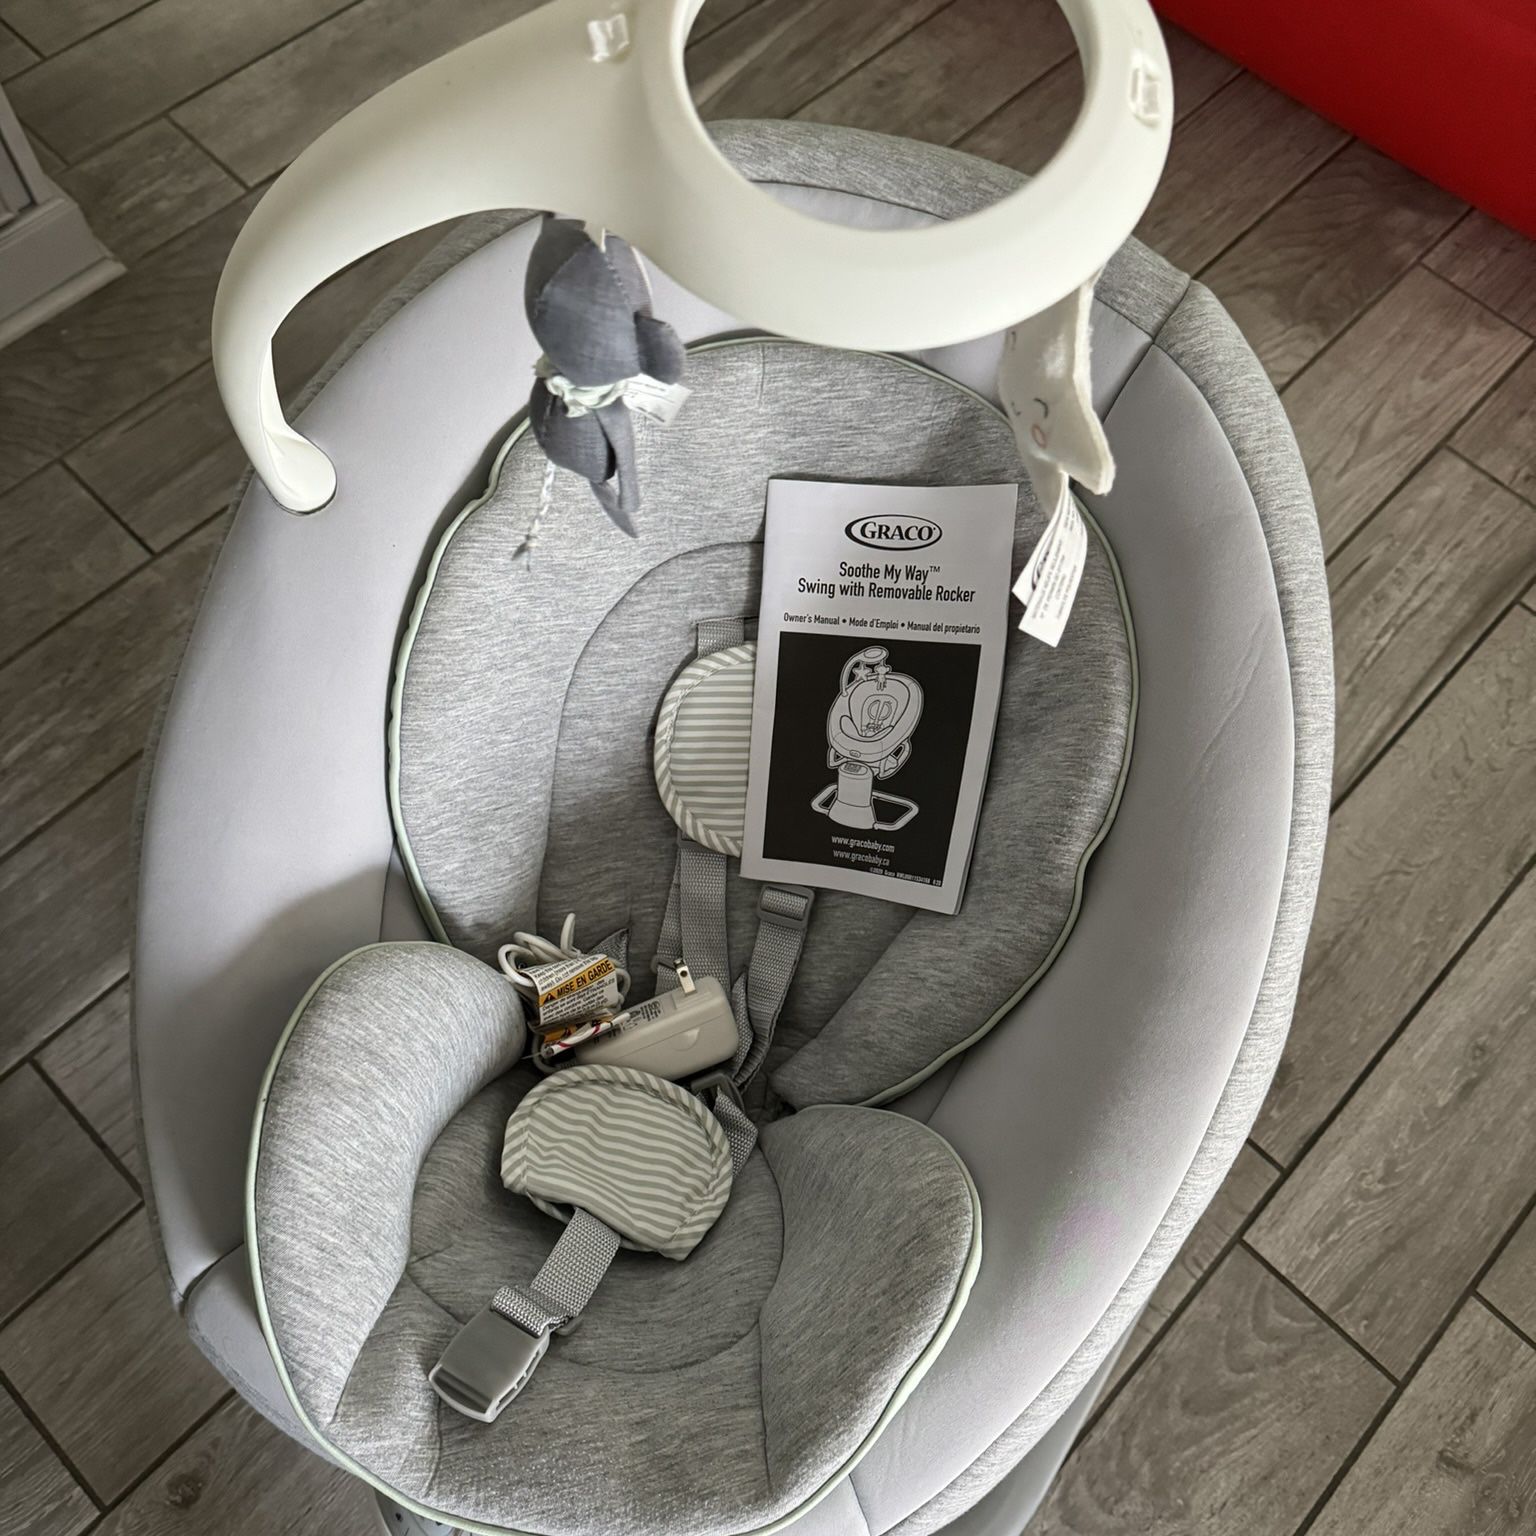 Graco Baby Soothe My Way Swing With Removable Rocker.